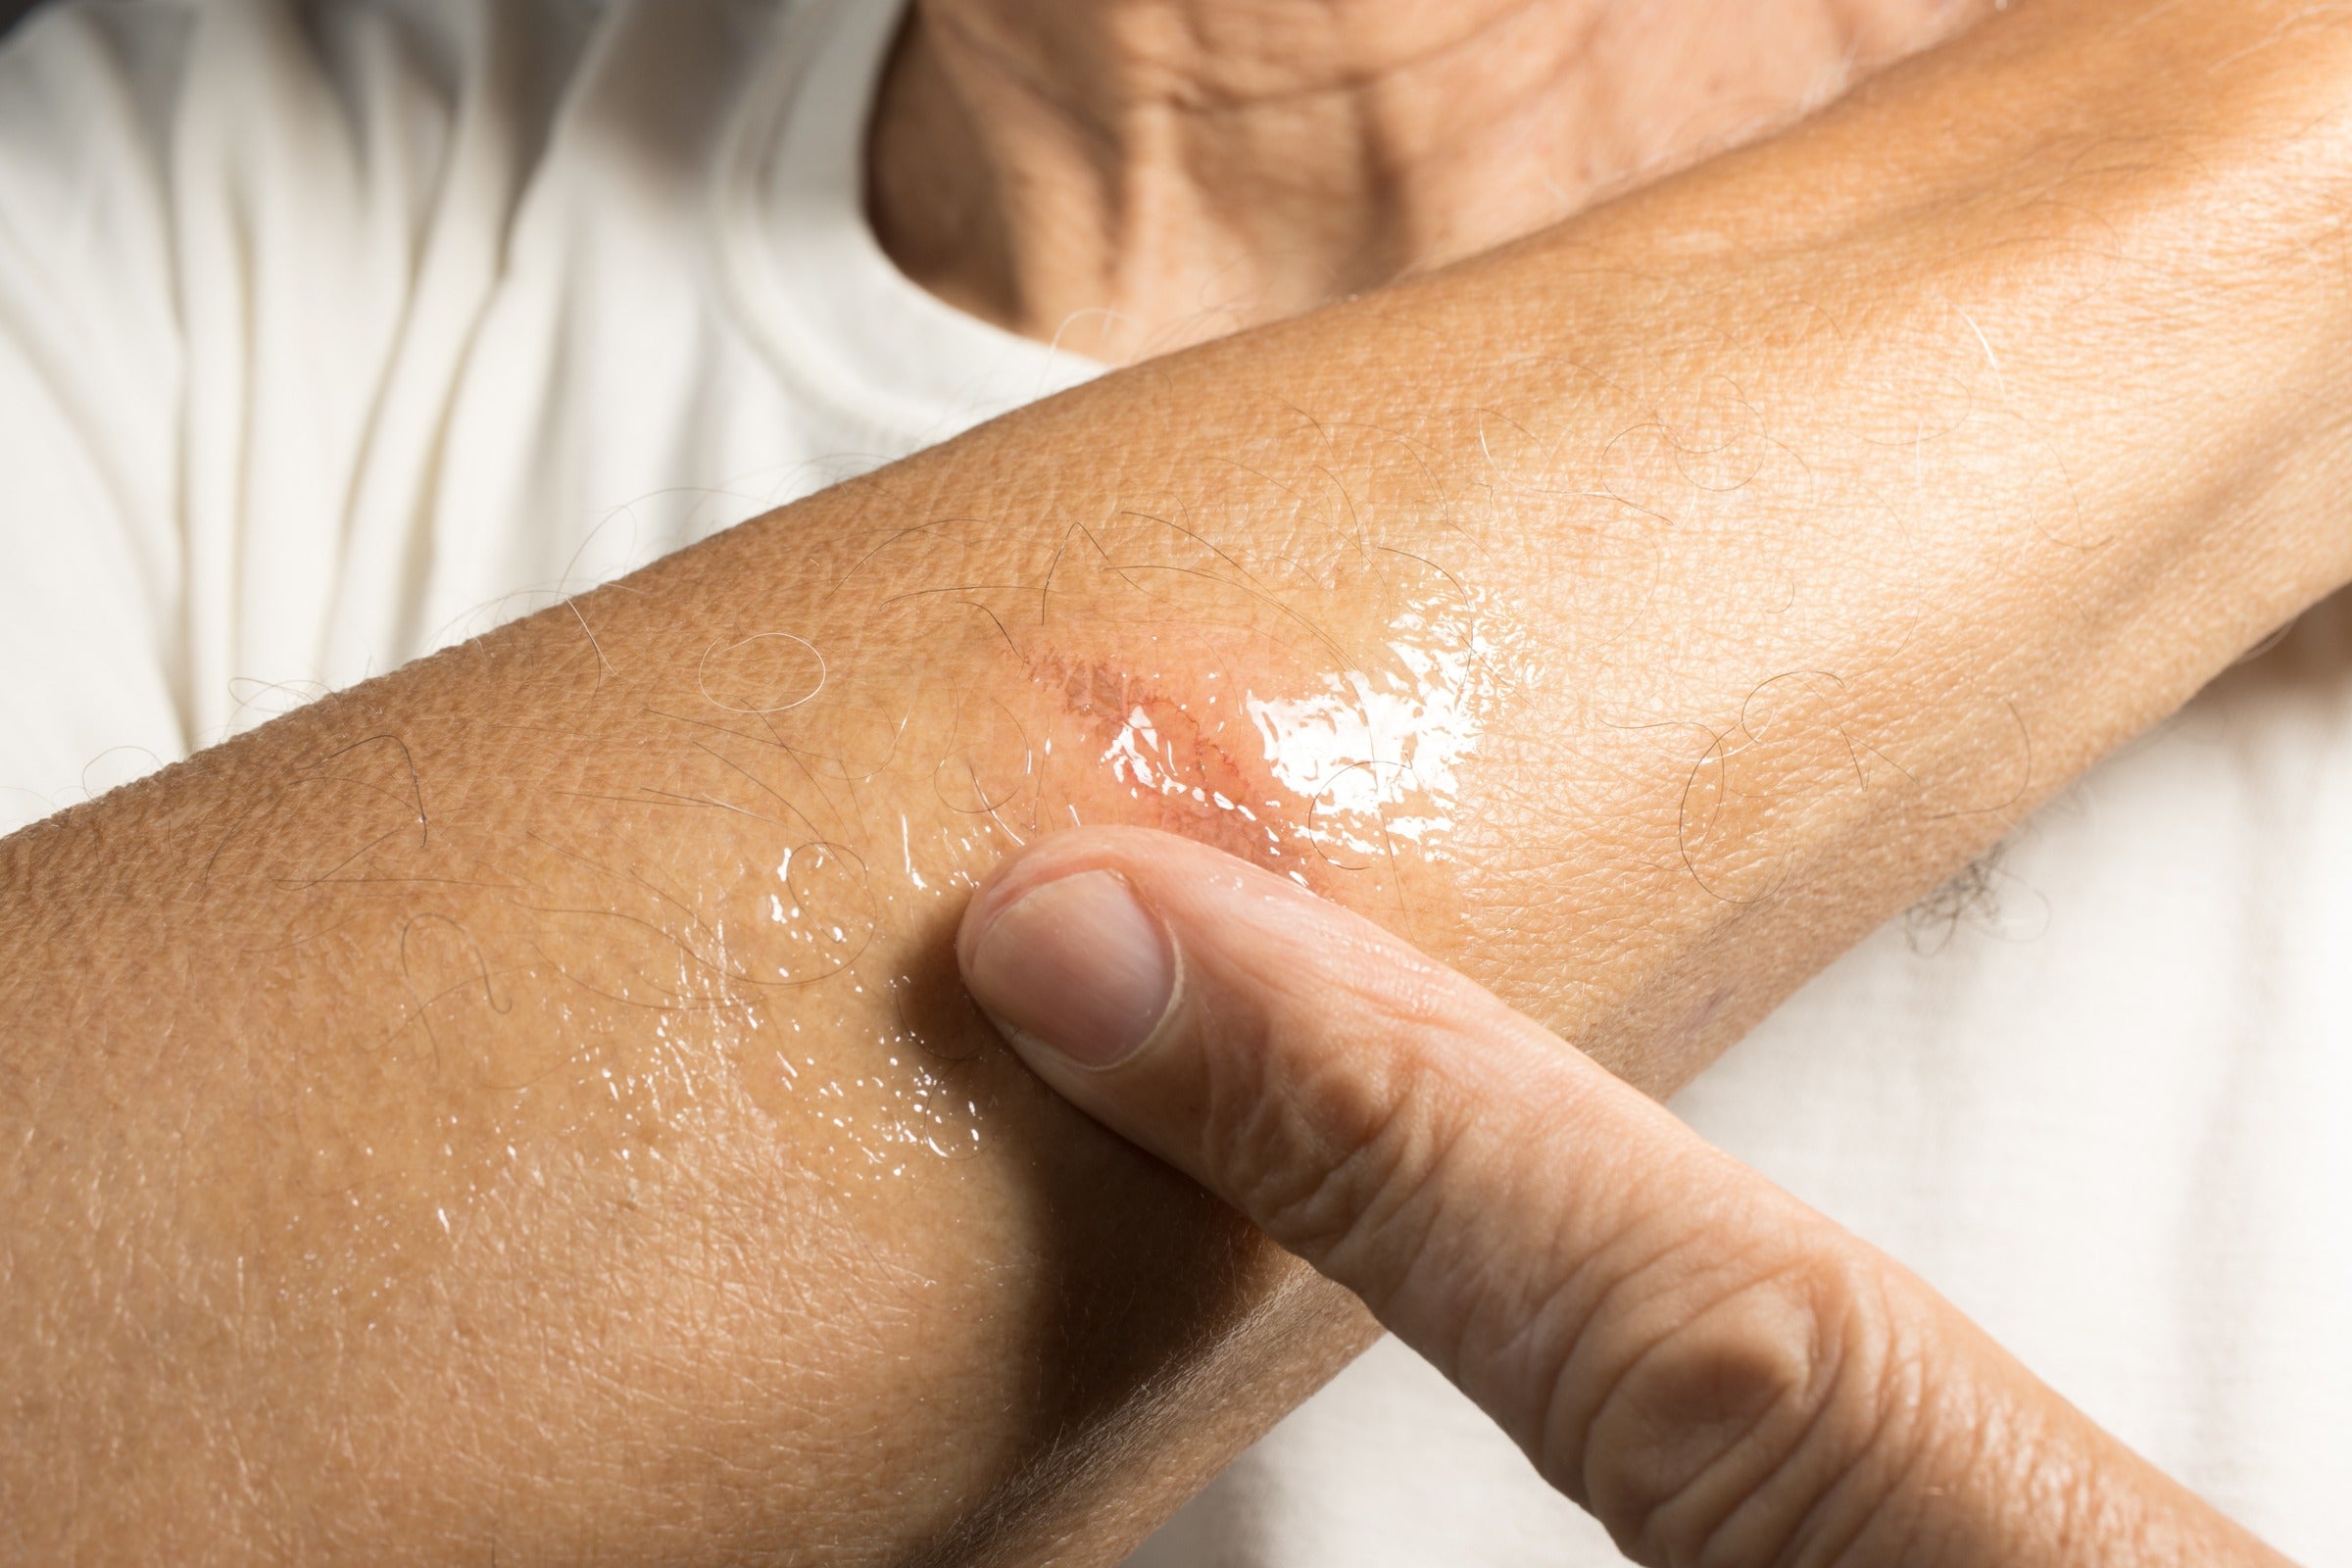 The 8 fastest ways to heal minor burns